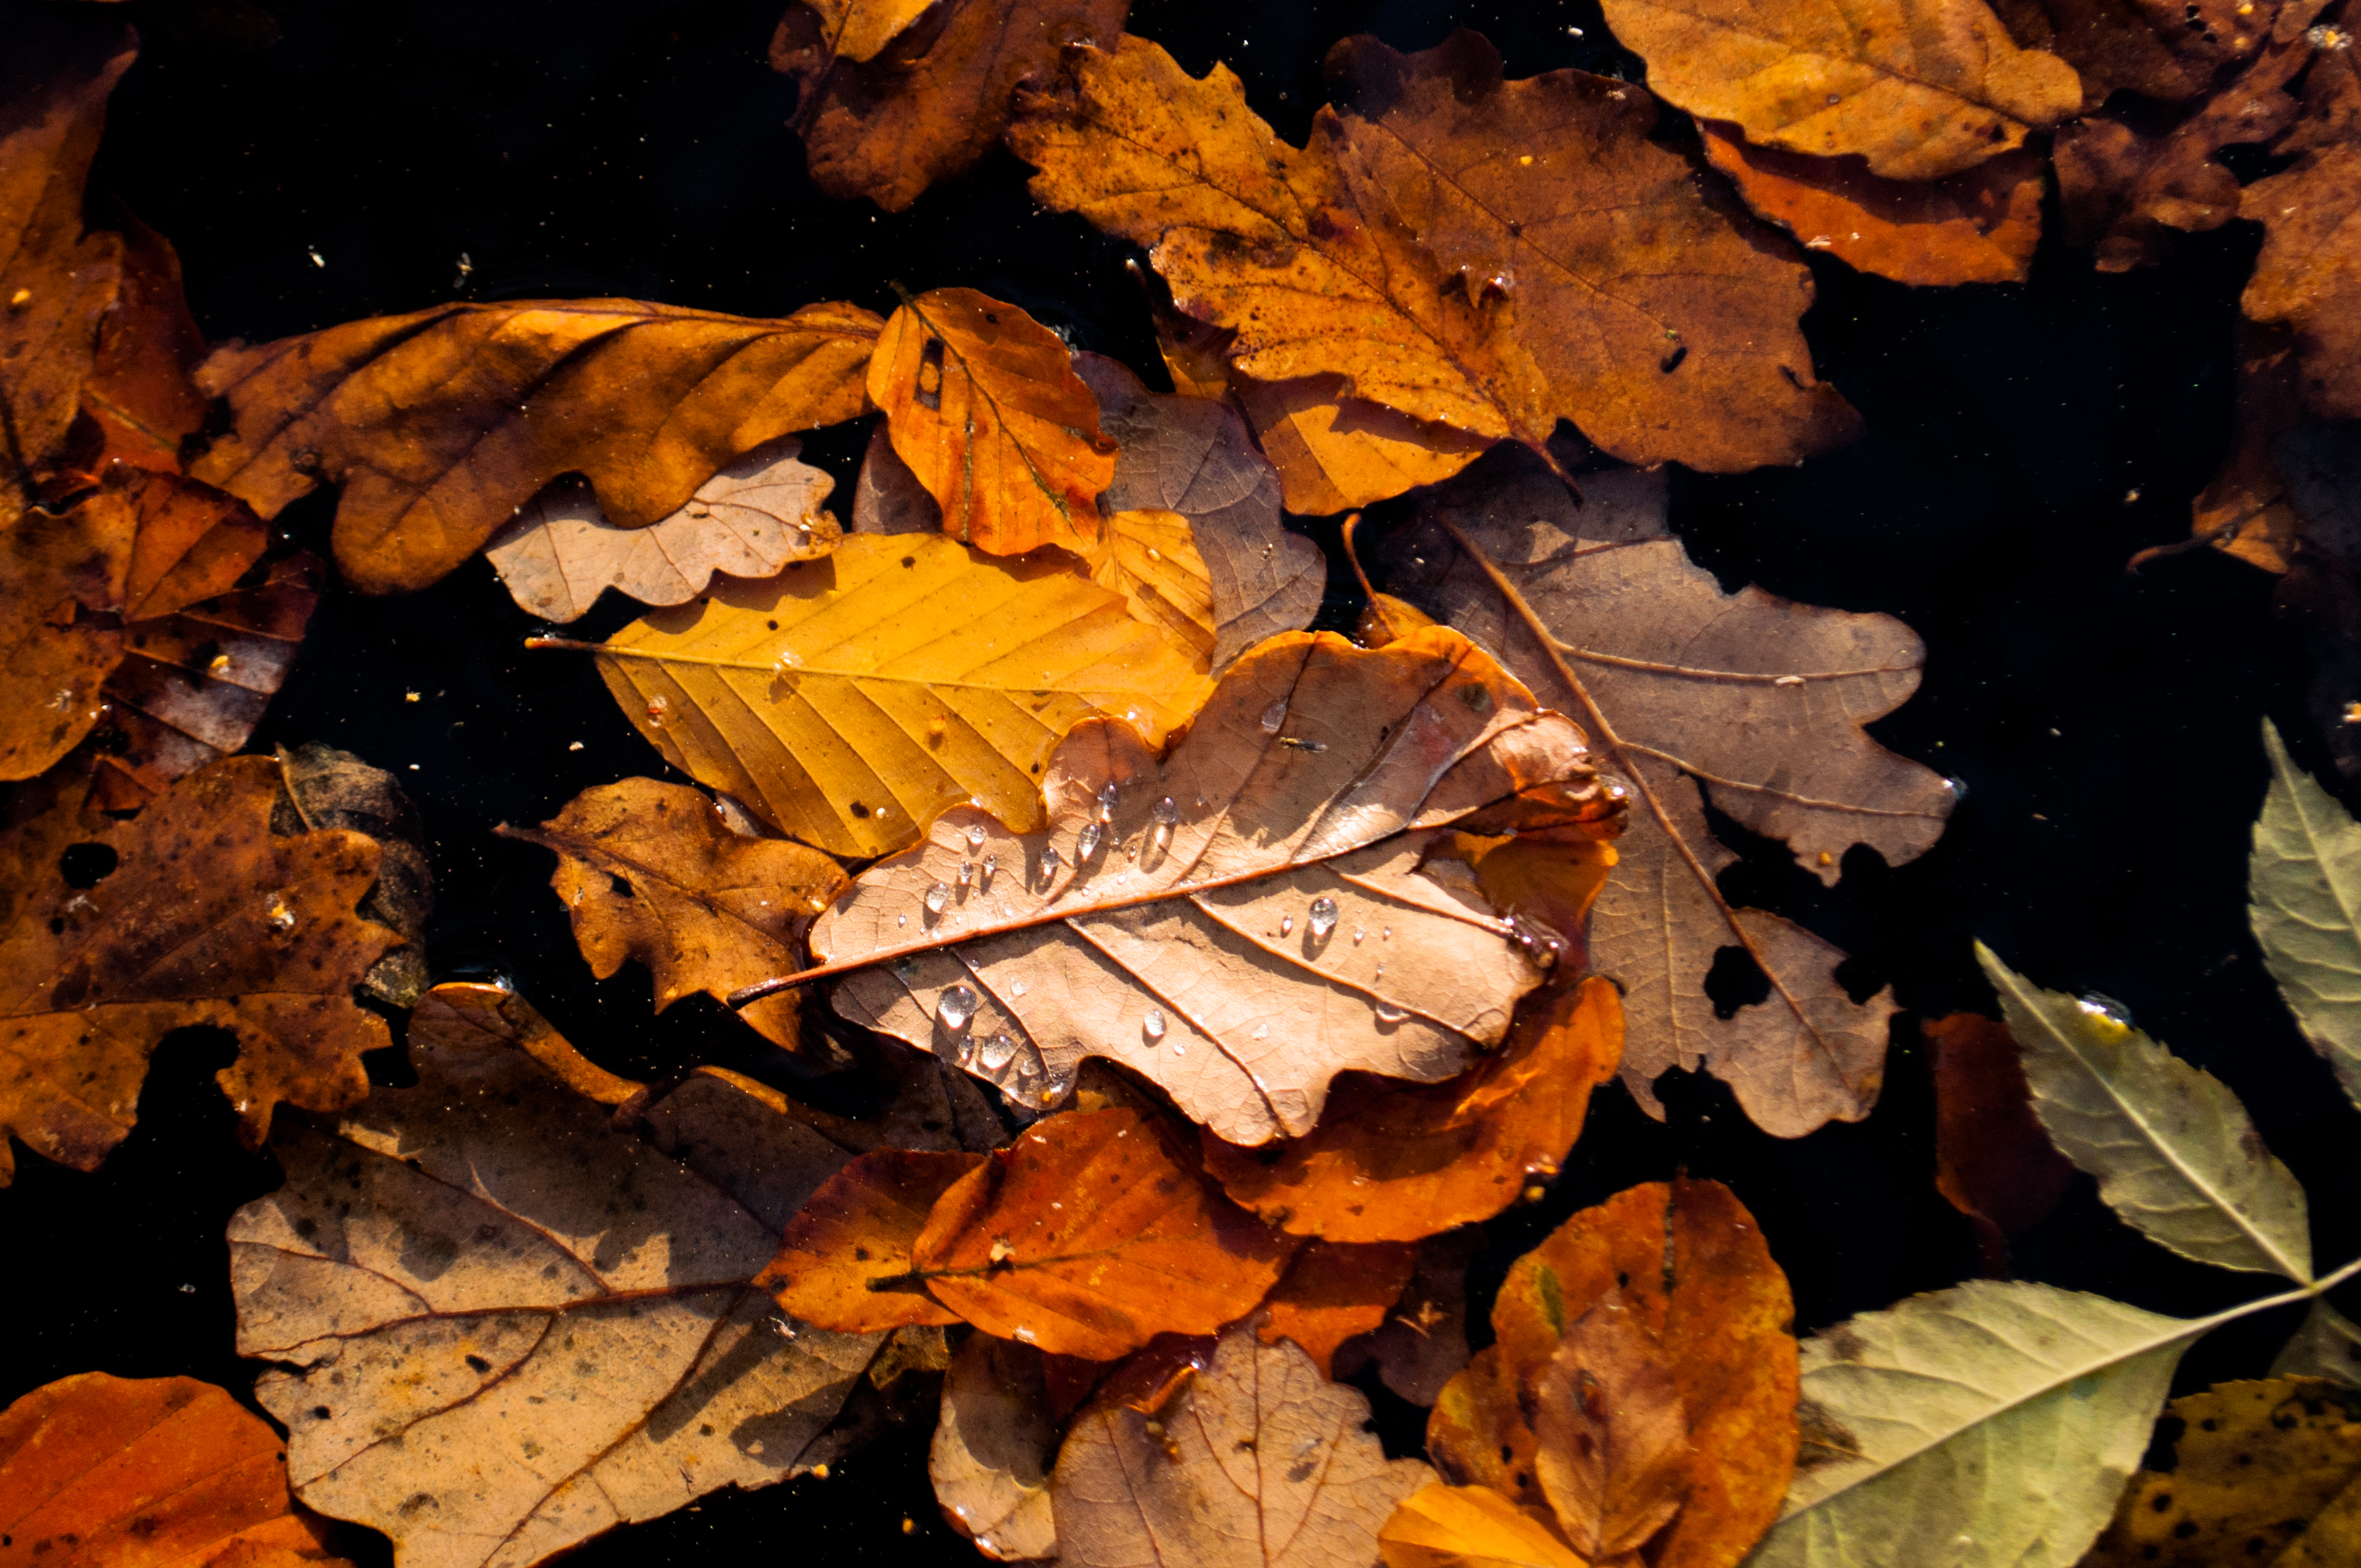 Chinese scientists create supercapacitors from fallen autumn leaves